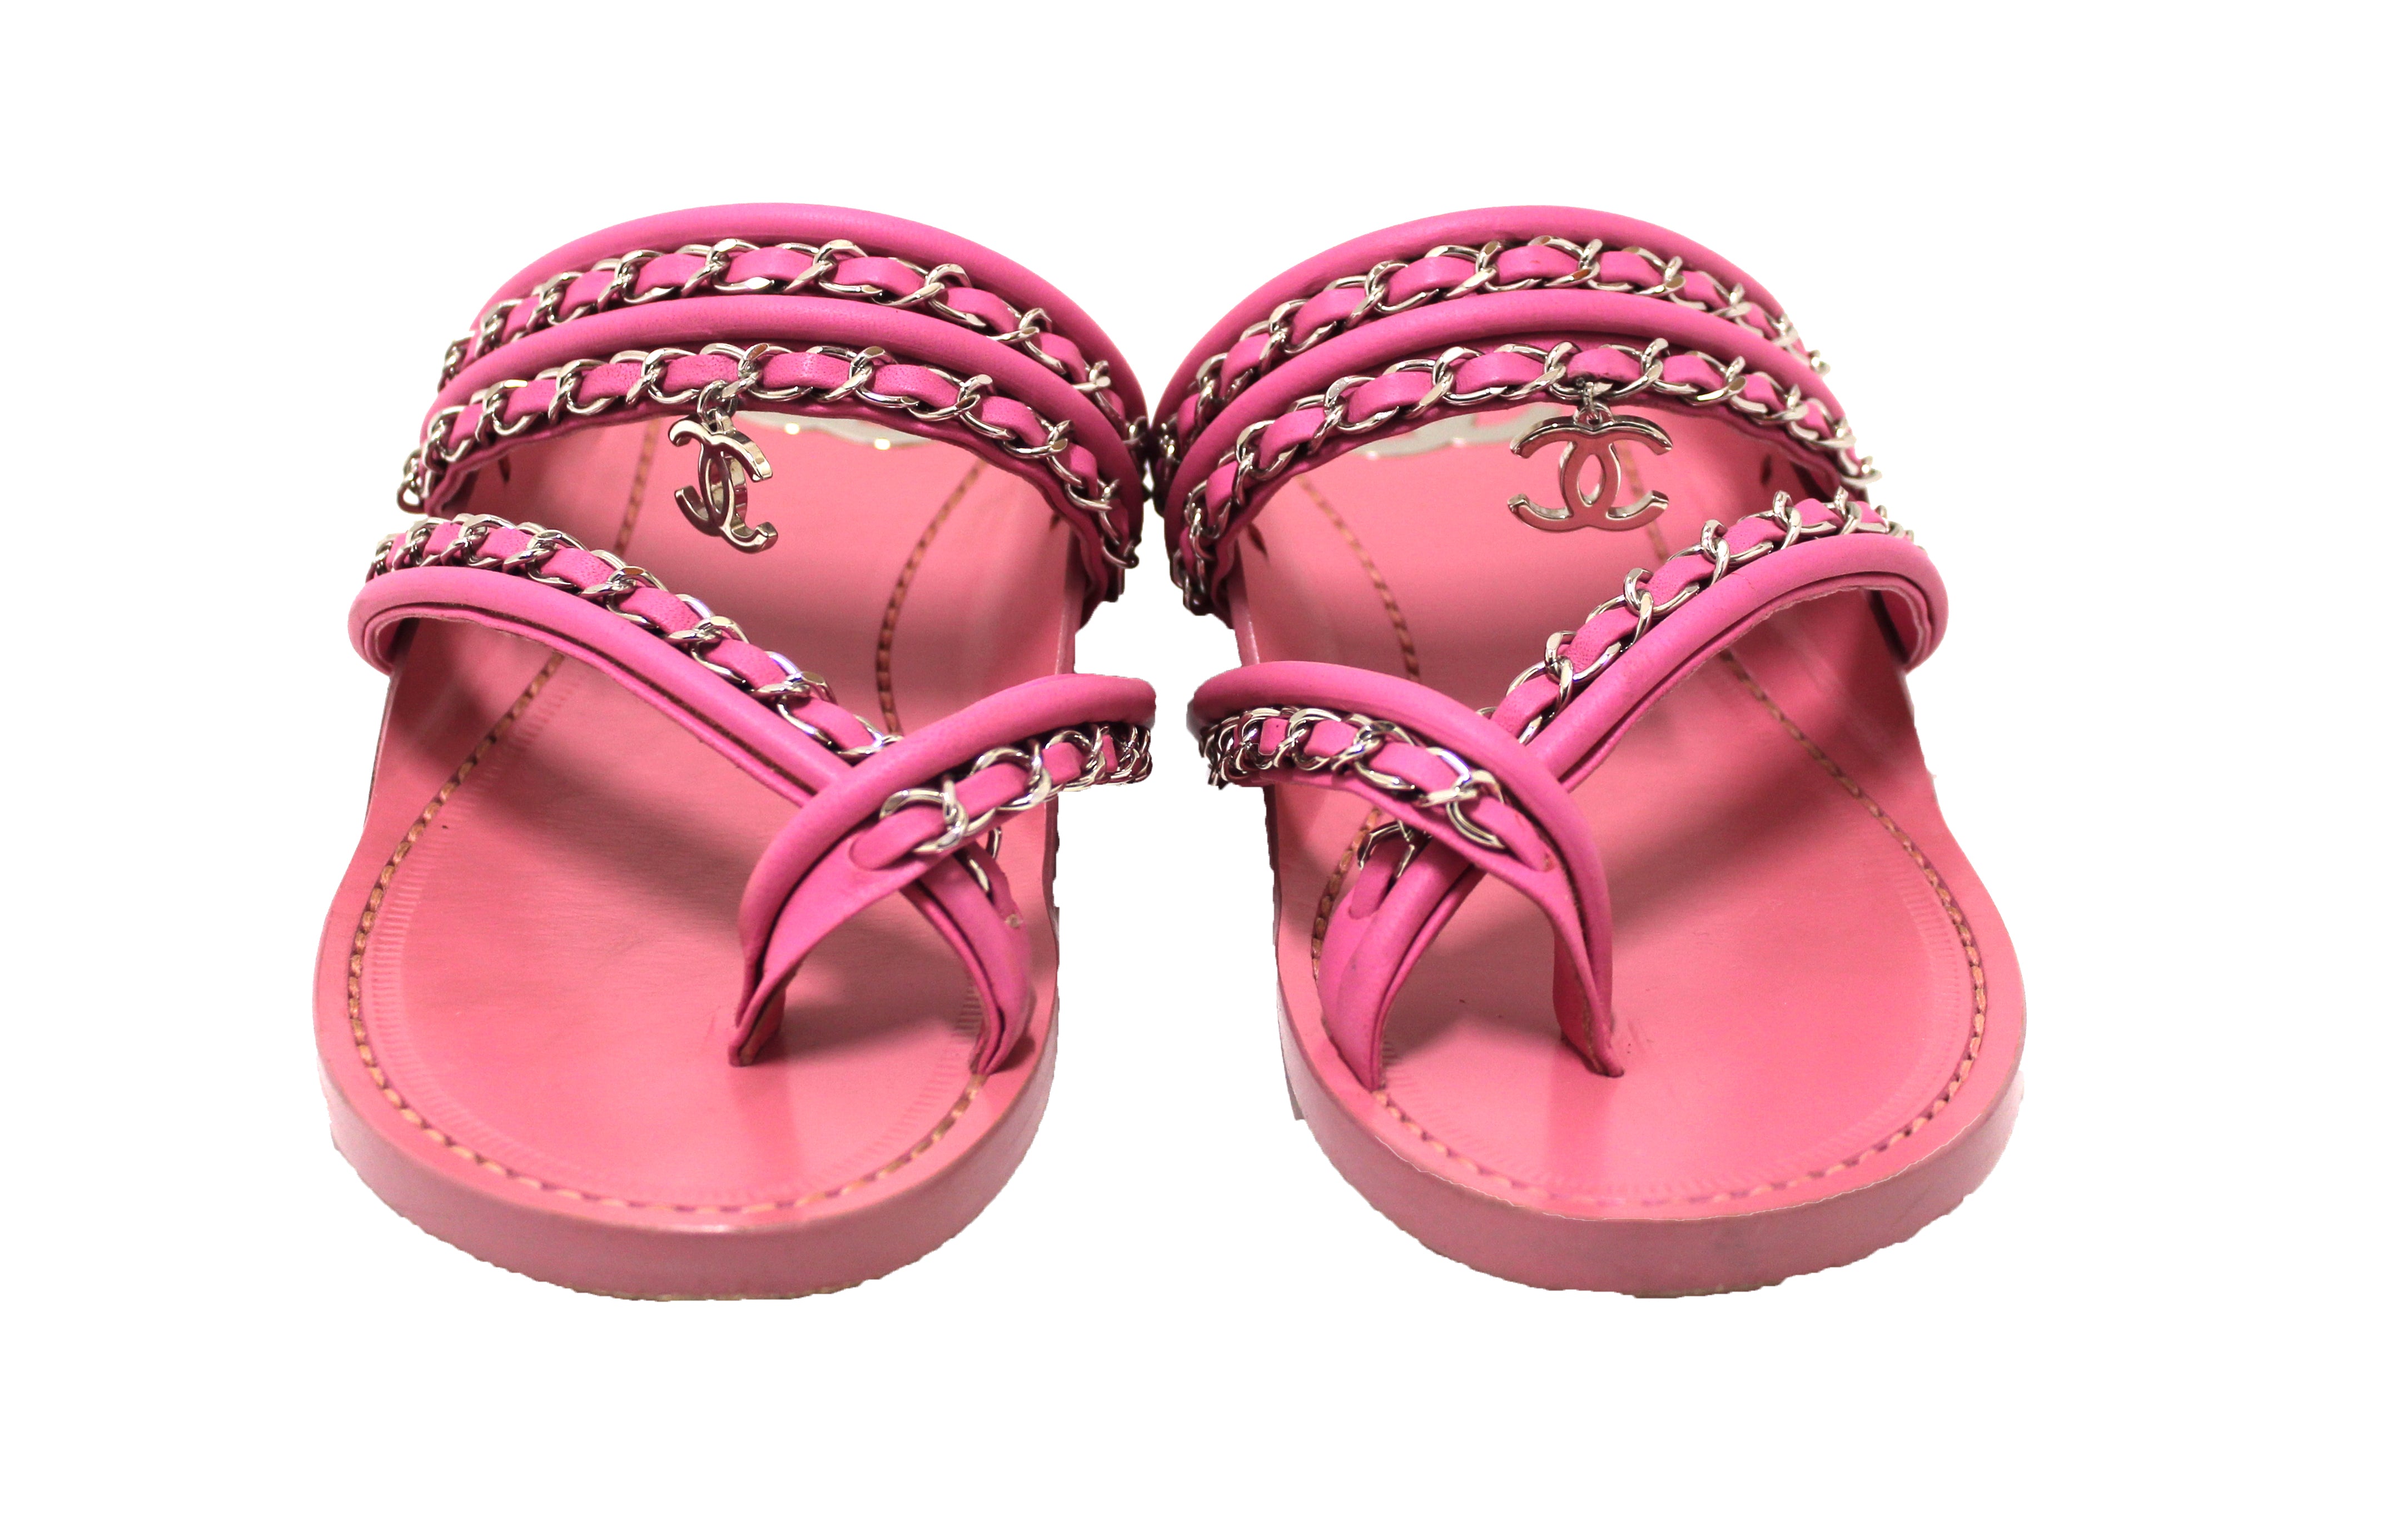 Authentic Chanel Pink Calfskin Leather Chain CC Thong Flat Sandals Size 35C